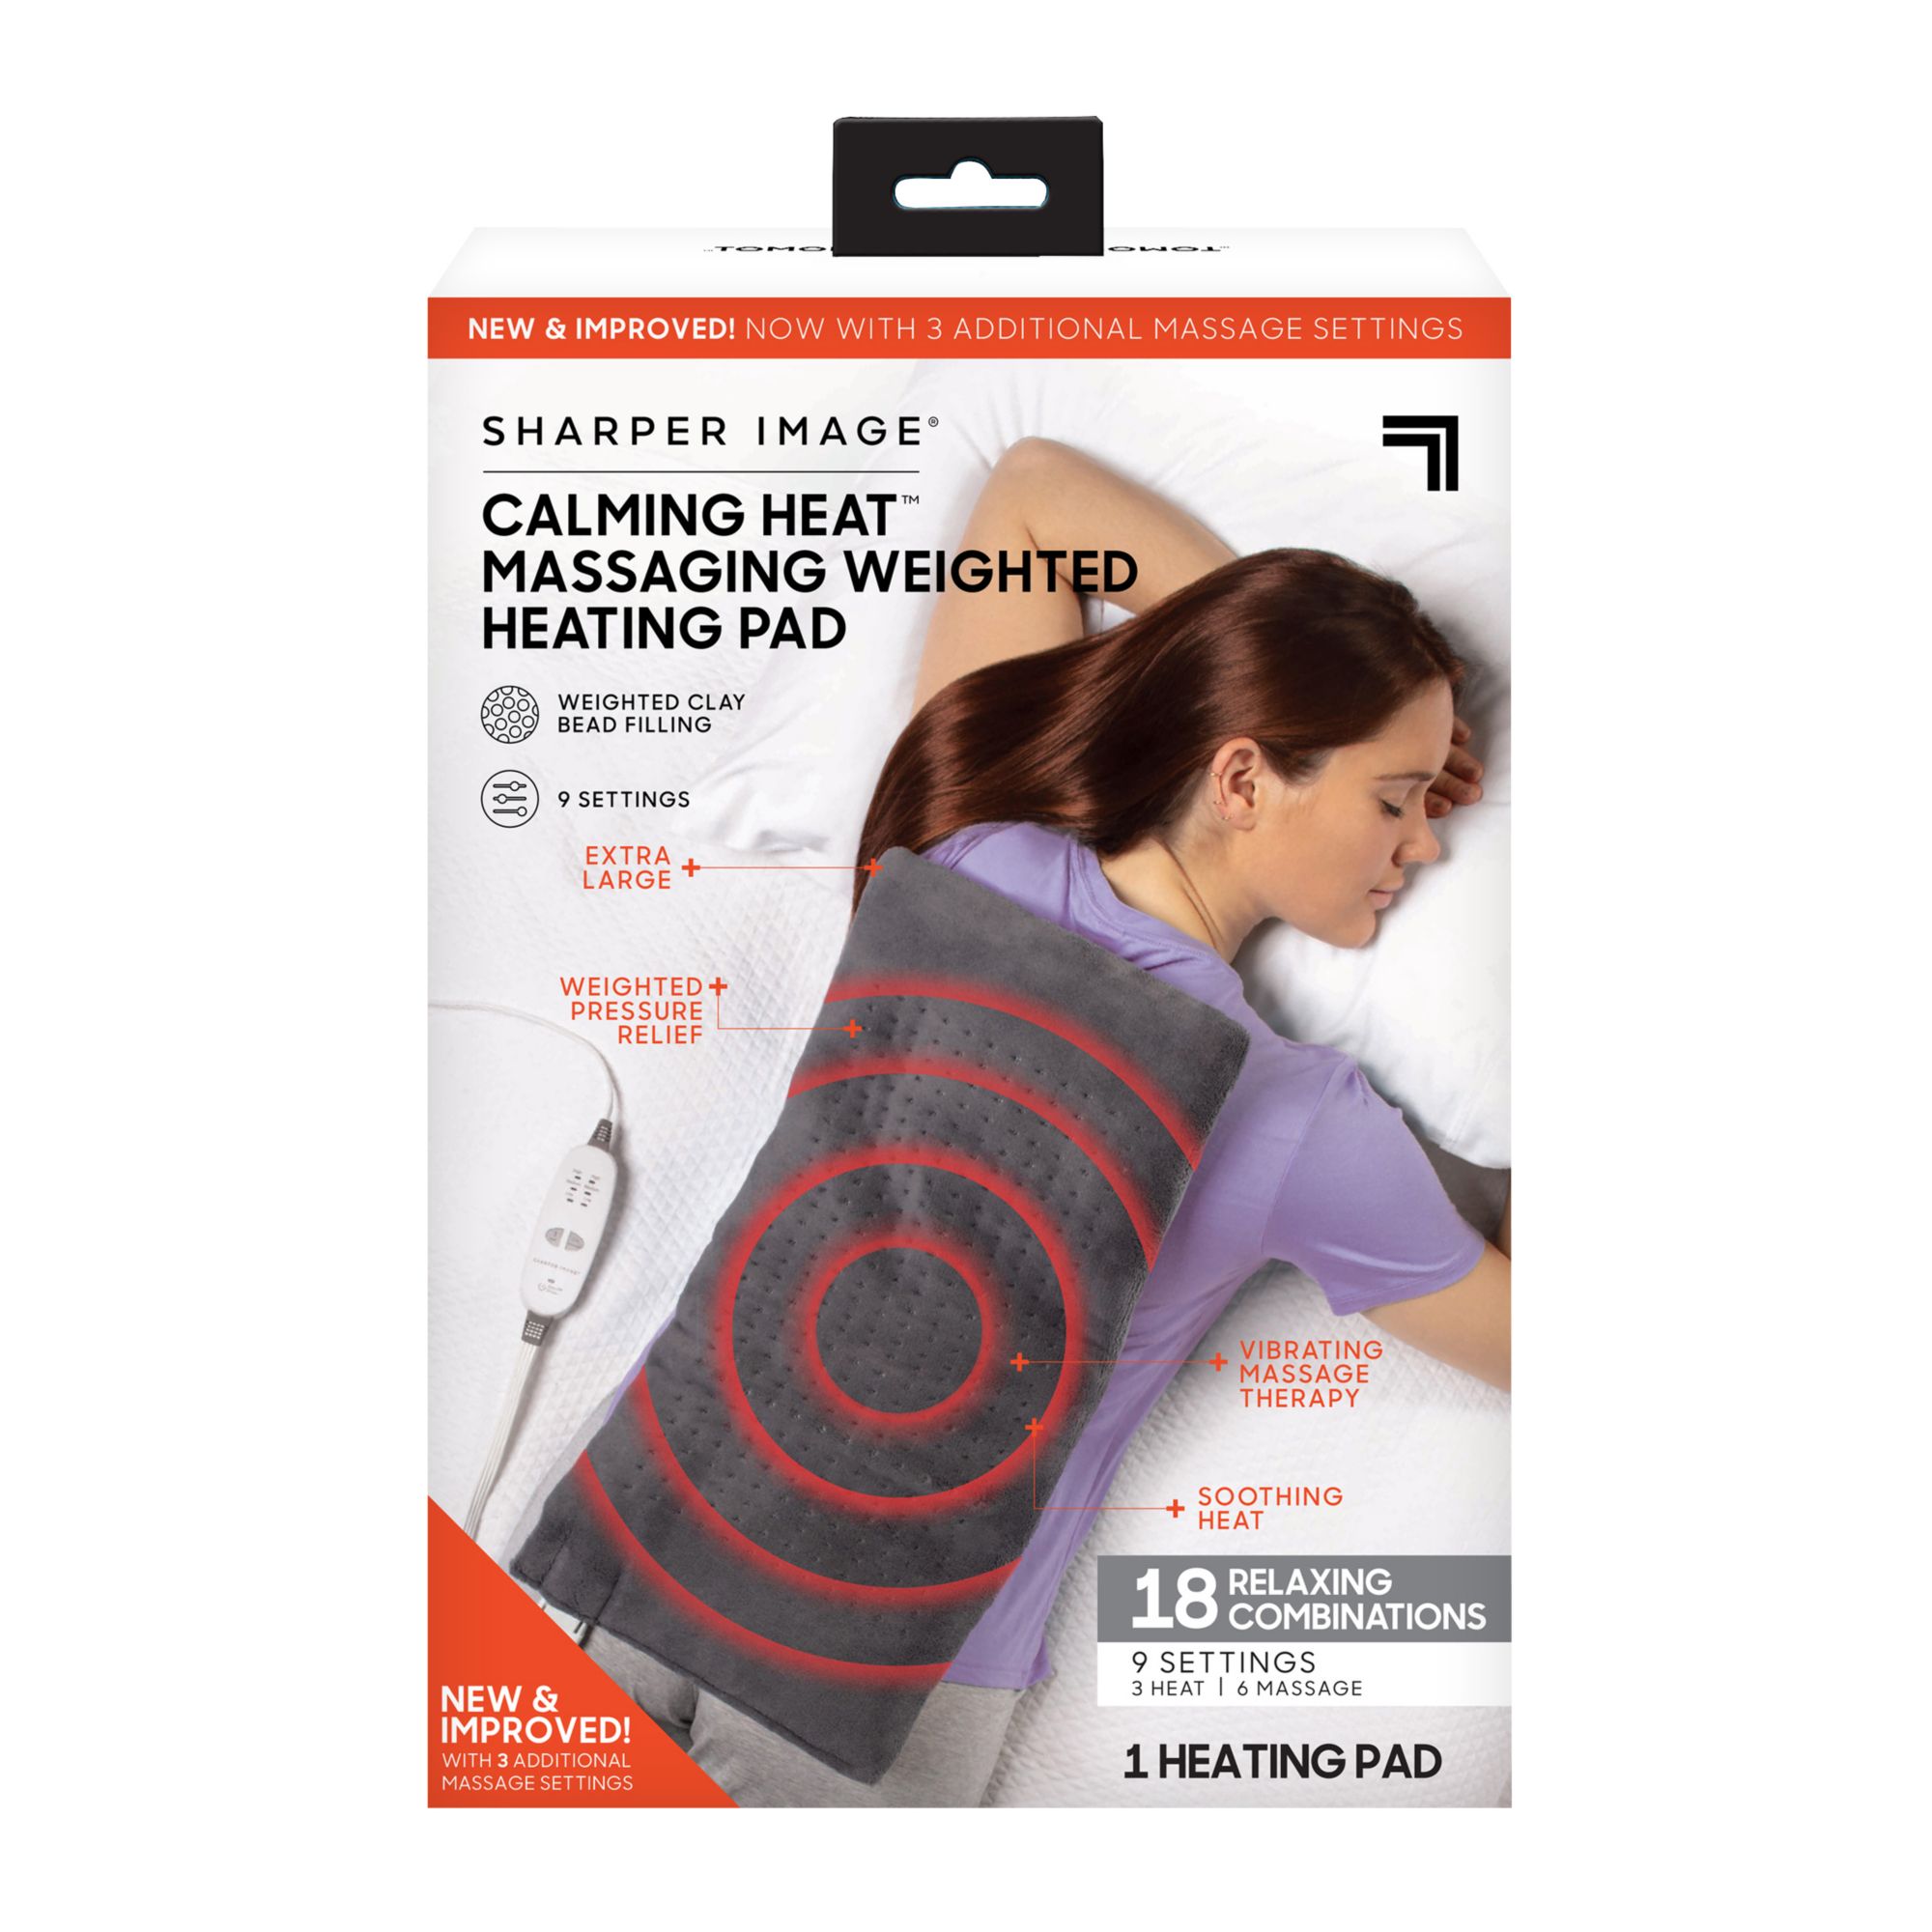 Calming Heat Massaging Weighted Heating Pad 6 Setting